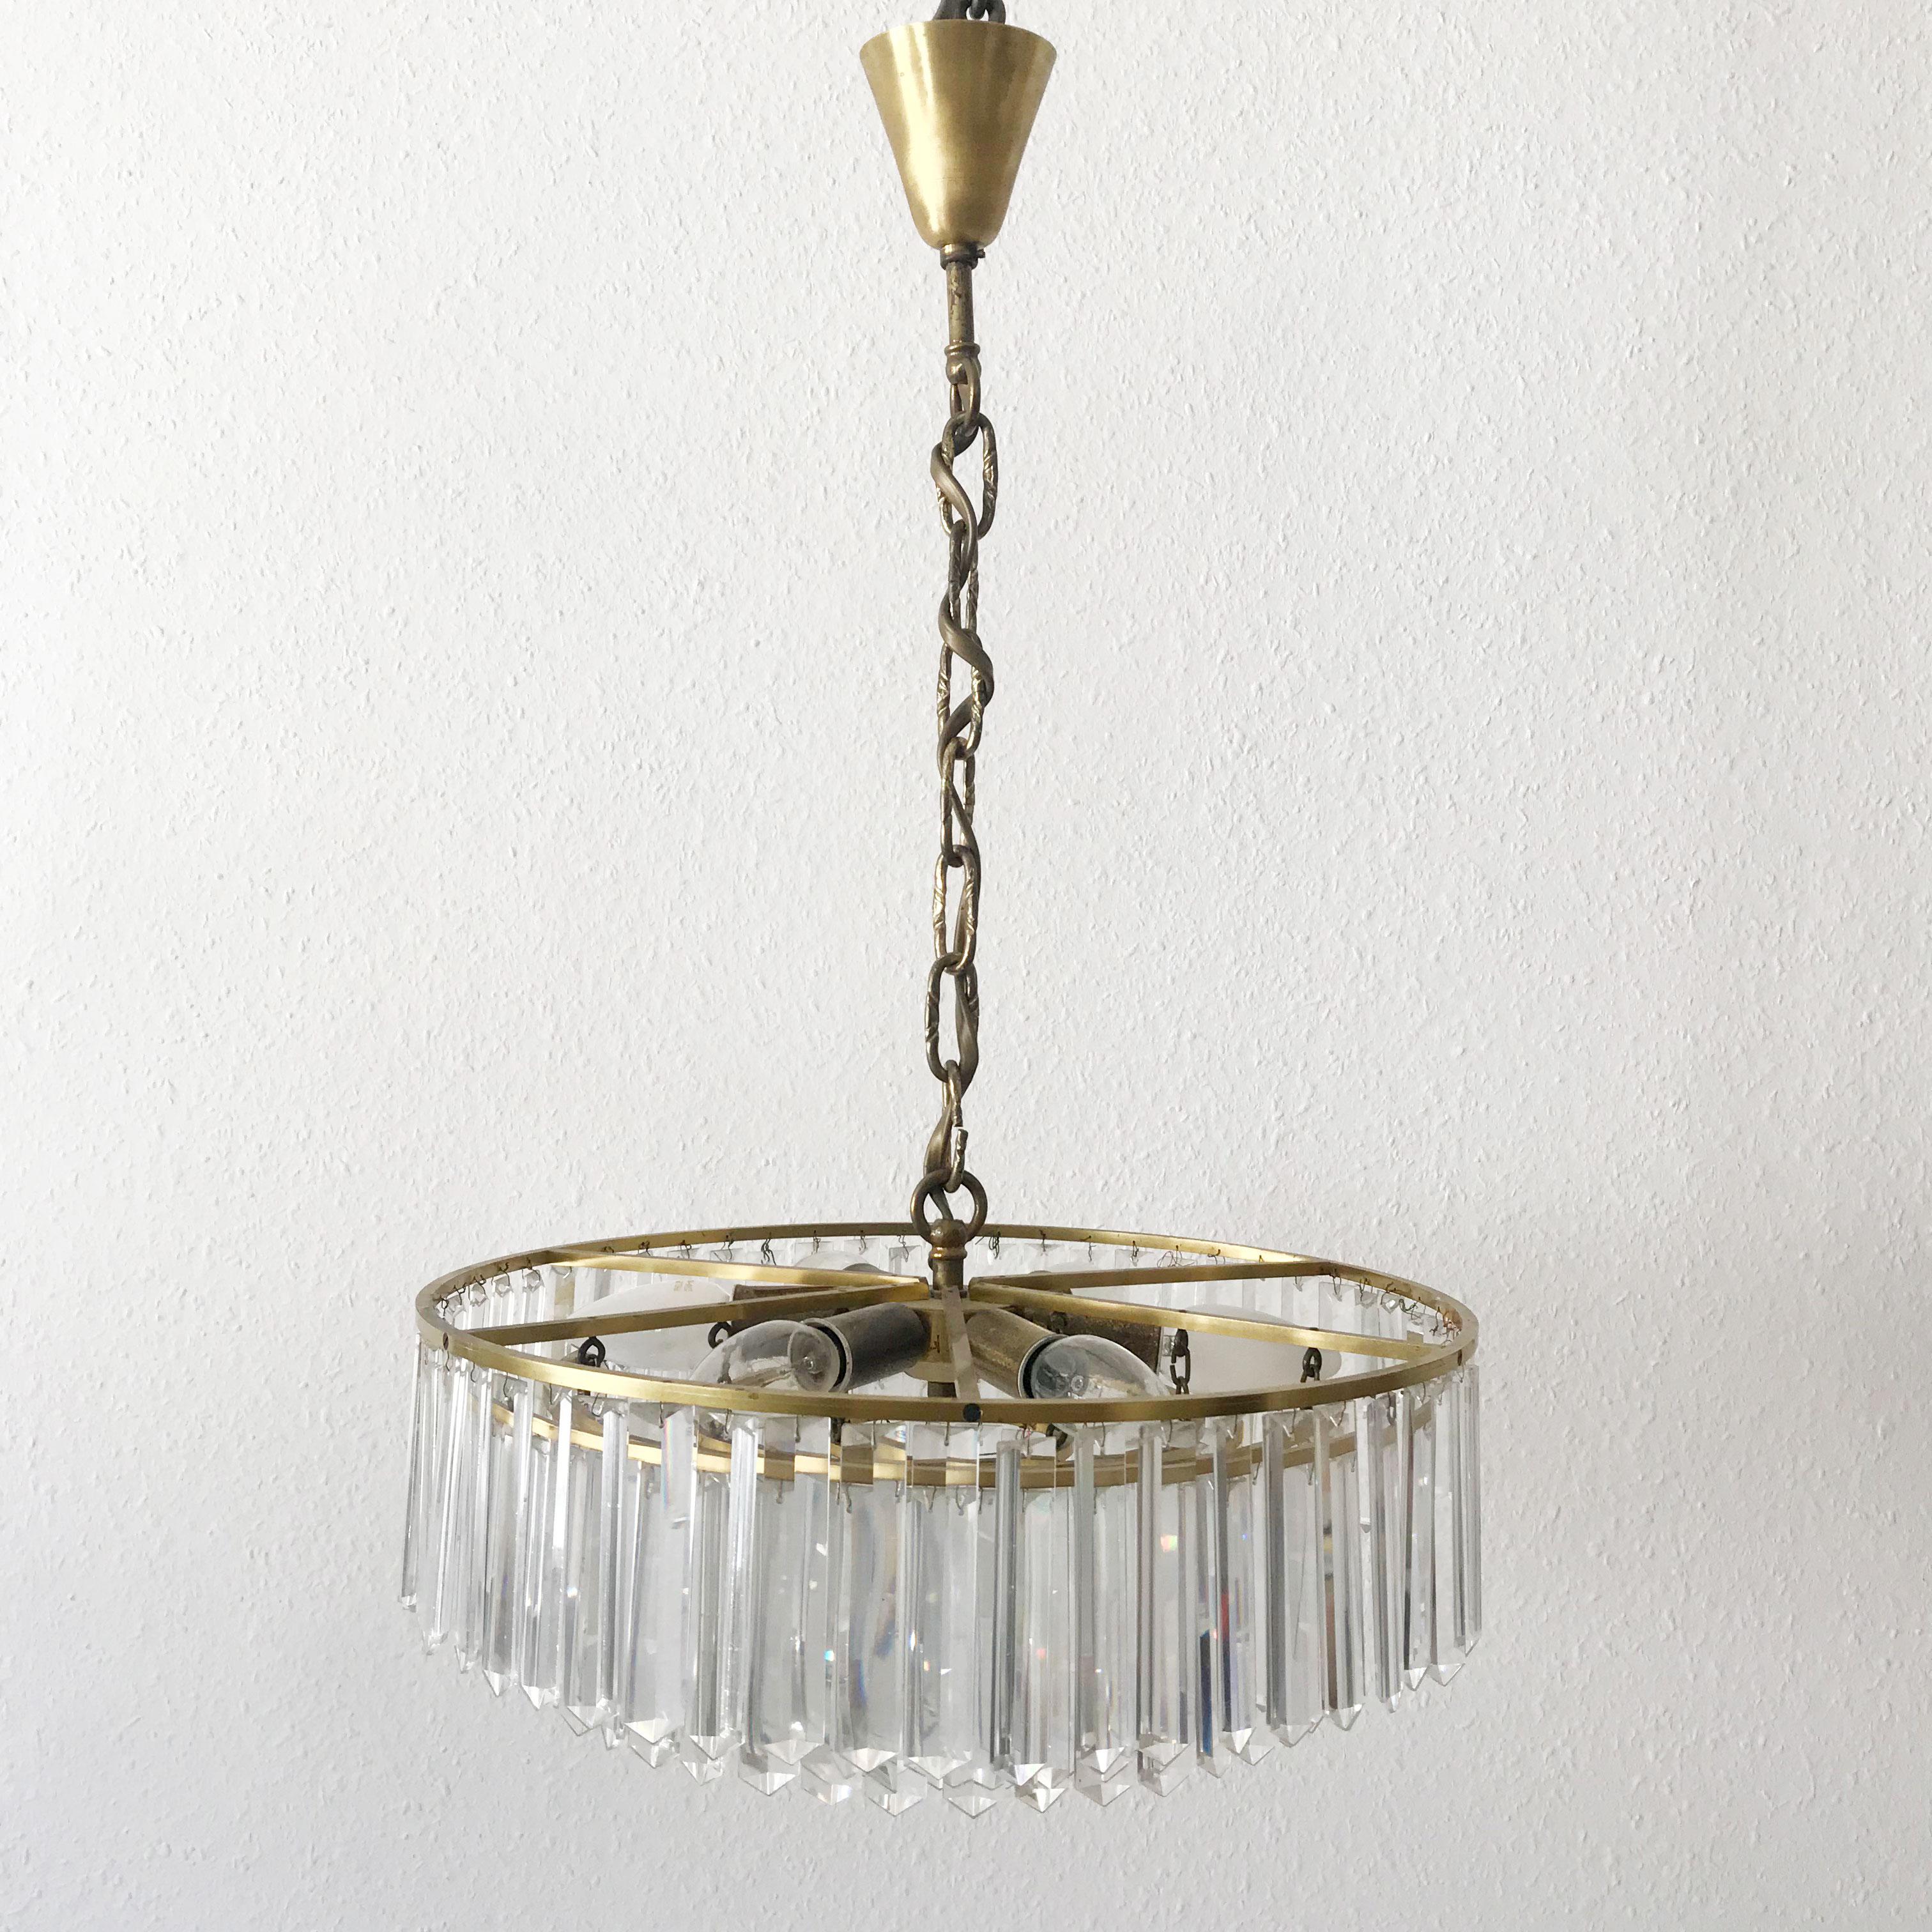 Crystal Glass Chandelier or Pendant Lamp by Bakalowits & Söhne, Vienna, 1950s For Sale 3